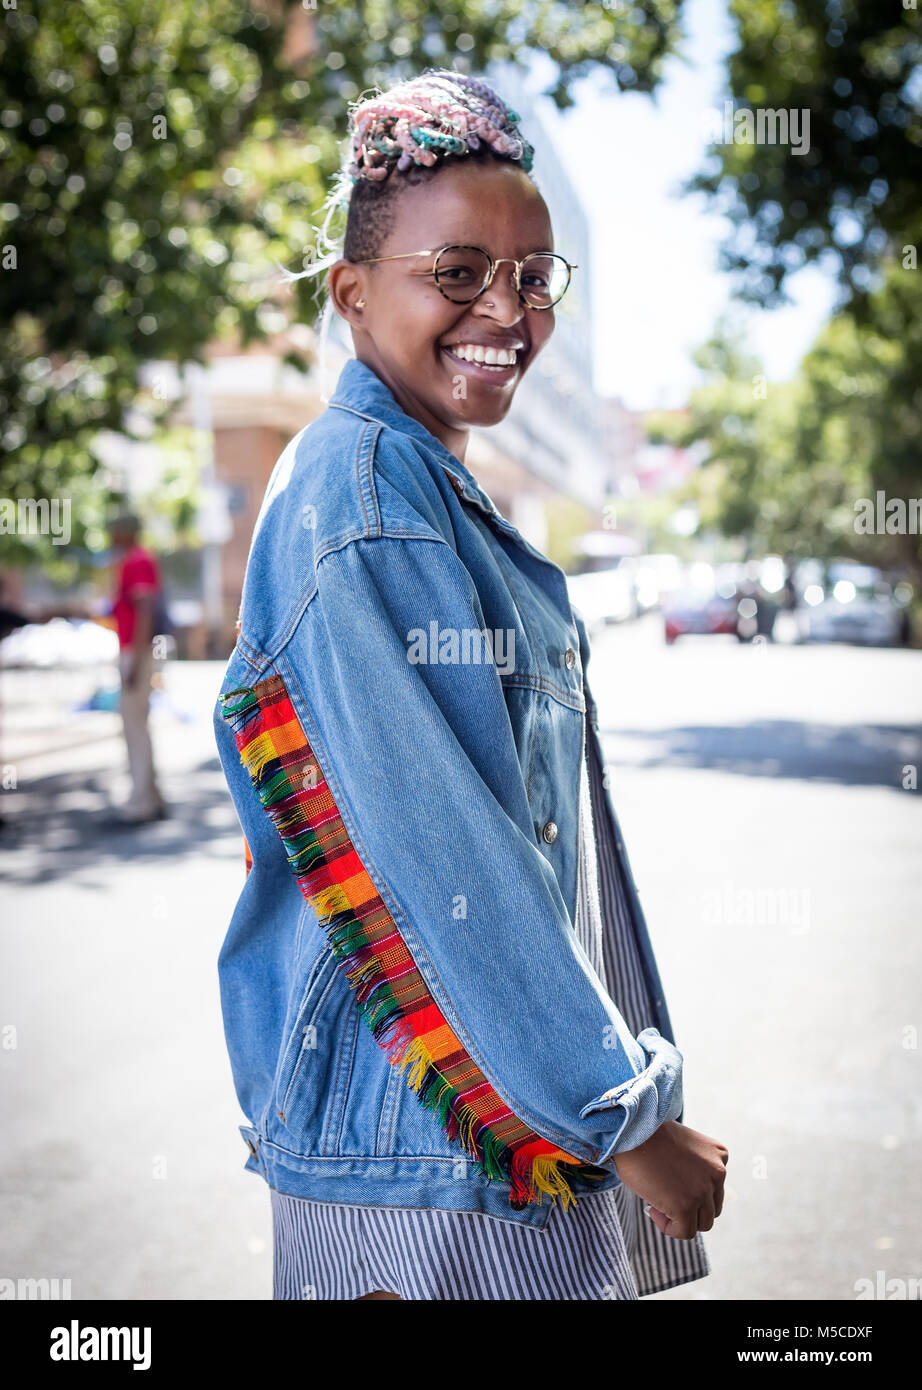 Johannesburg, Gauteng, South Africa, 20018/01/10. A African women smiling and looking happy on streets of Johannesburg. Stock Photo